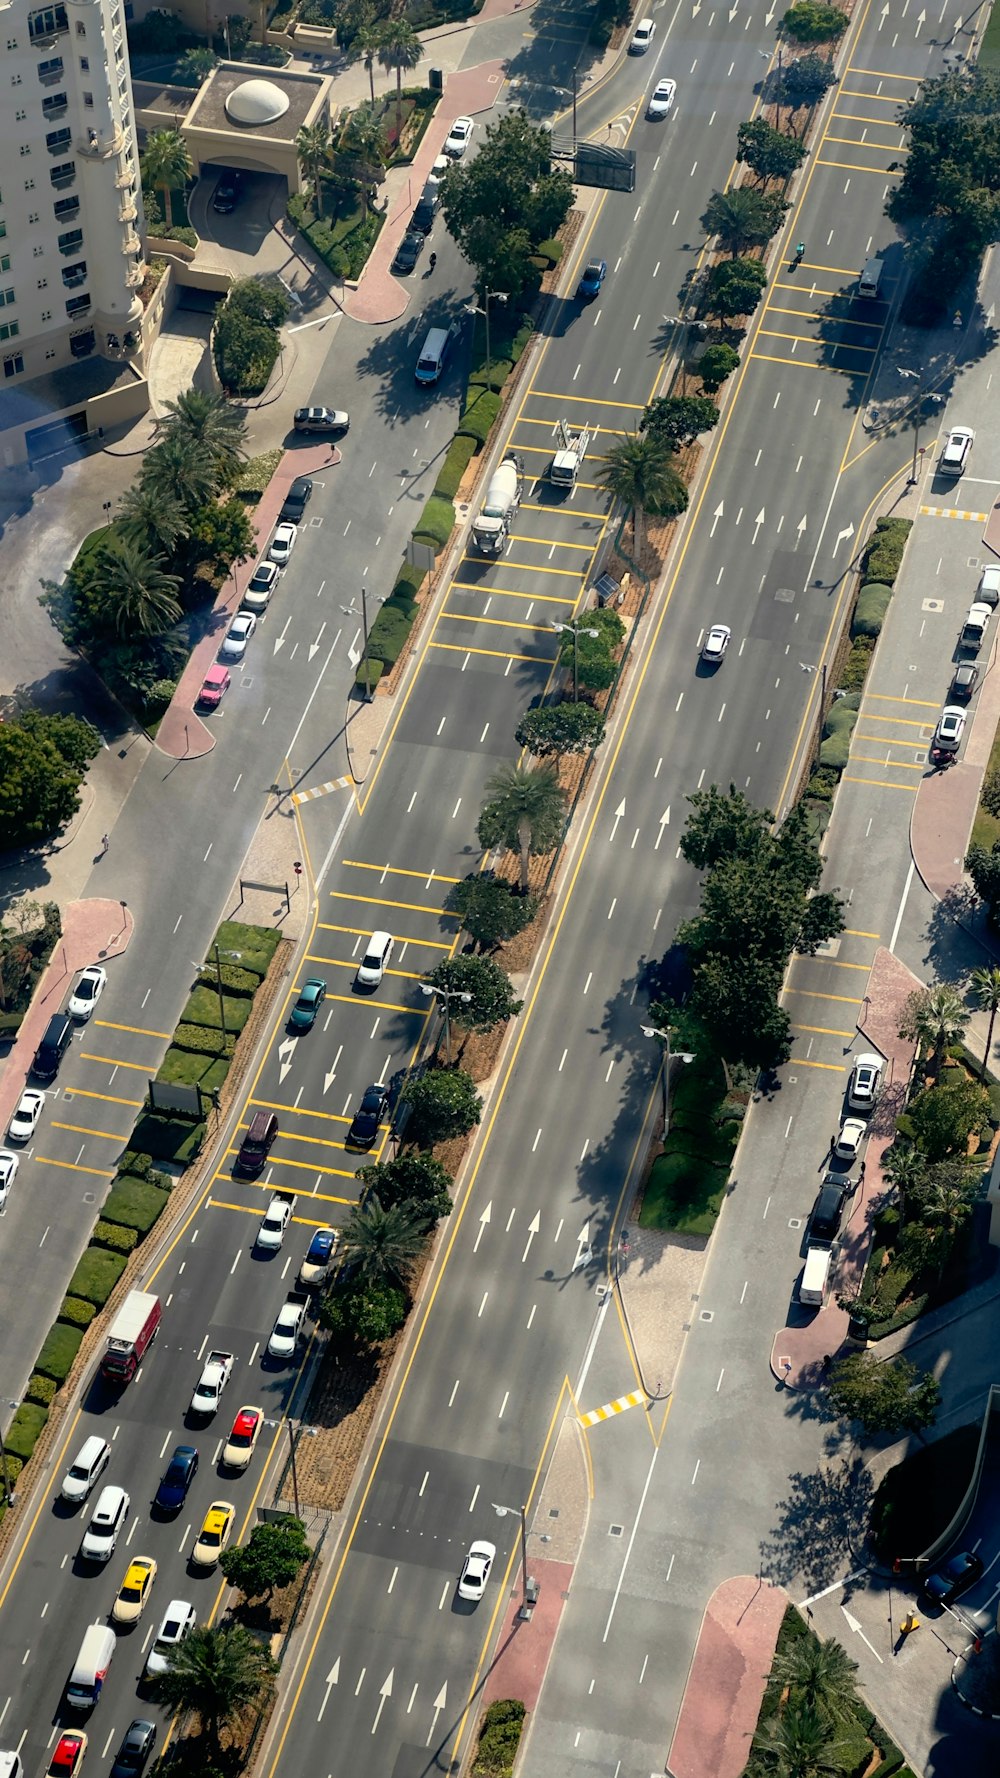 an aerial view of a city street with many cars